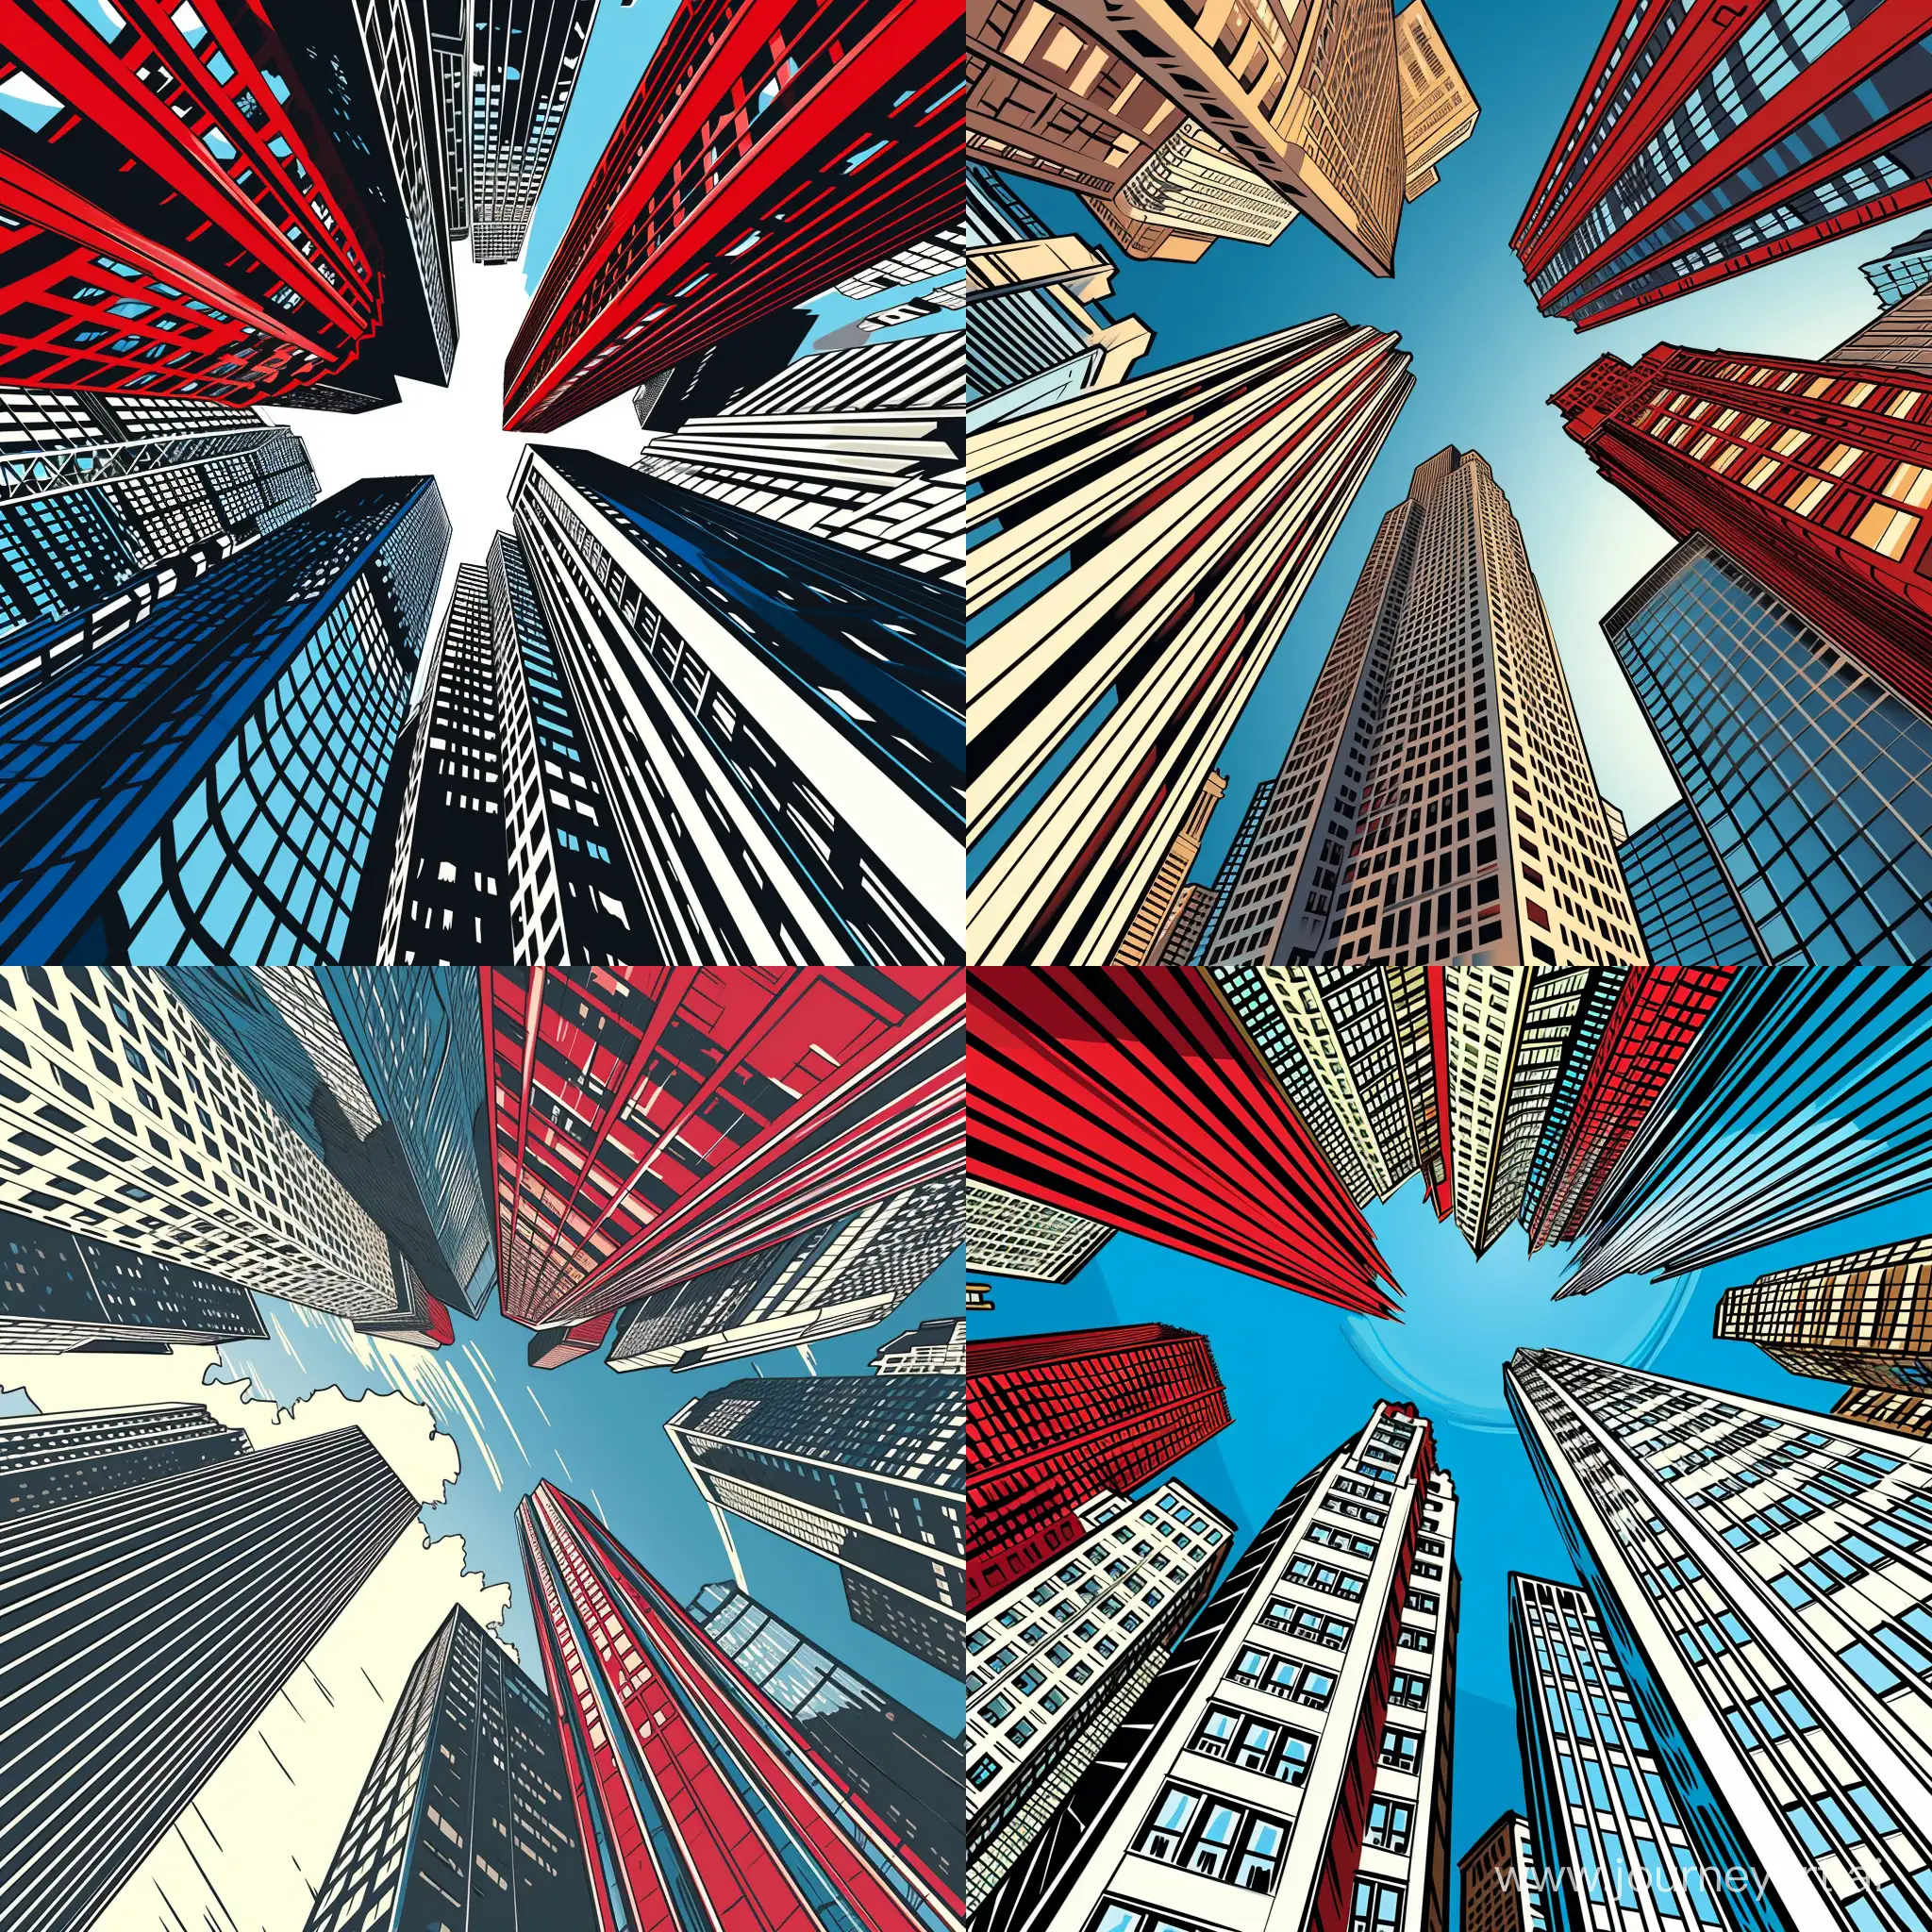 Skyscrapers Wallpaper, Comic Book Style, Colors: White Blue Red, Adobe Illustrator Software, Raw Style, High Precision